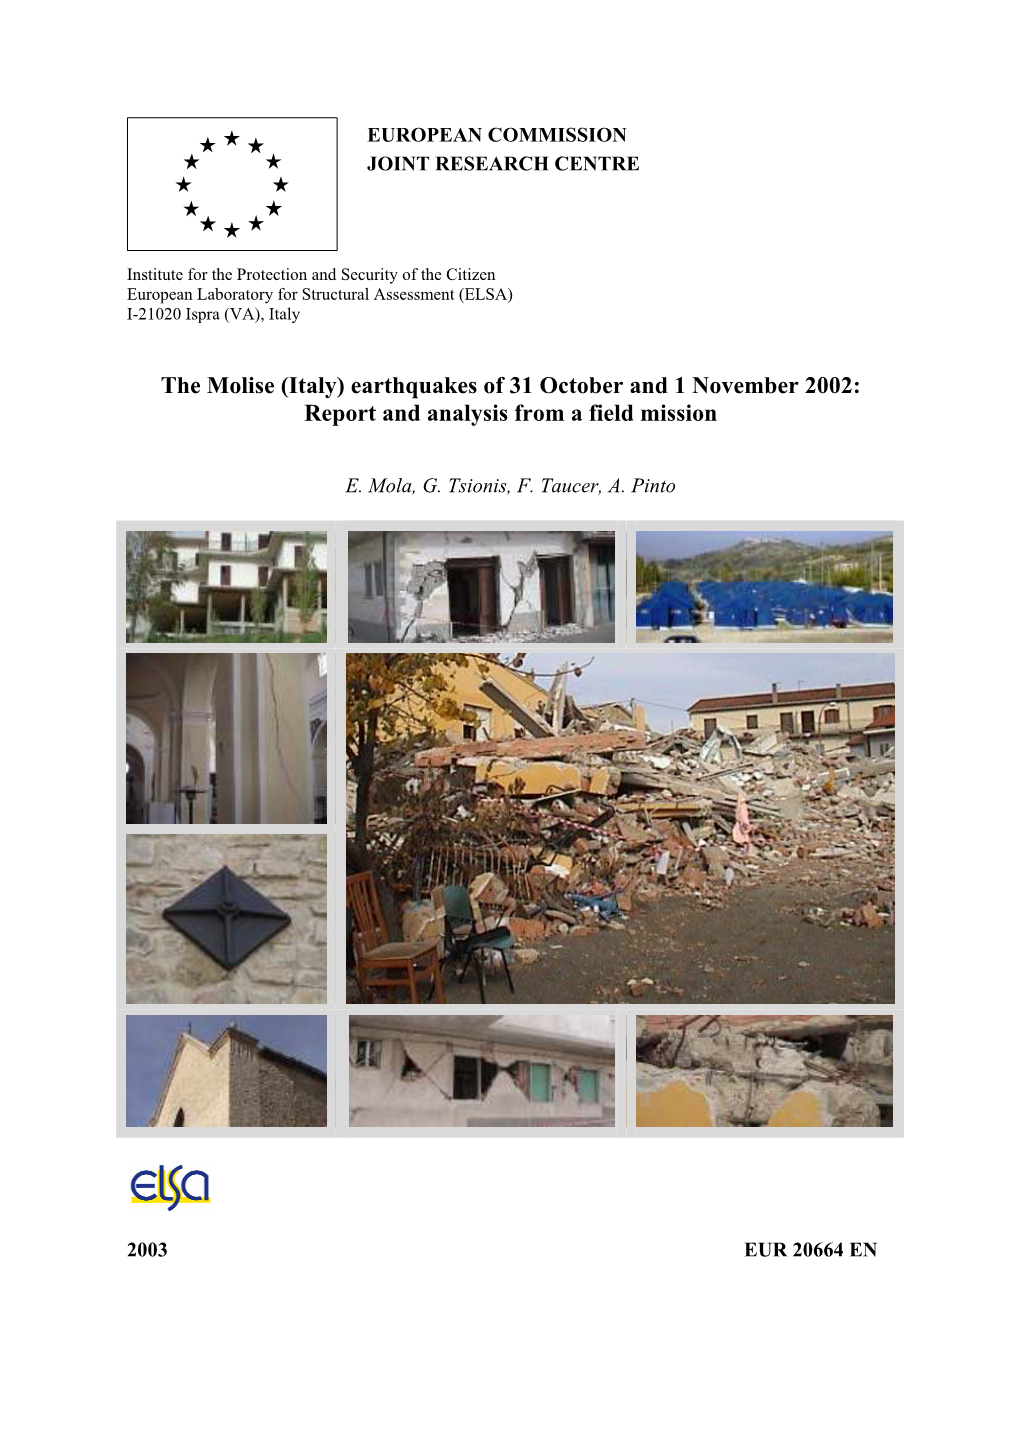 The Molise (Italy) Earthquakes of 31 October and 1 November 2002: Report and Analysis from a Field Mission